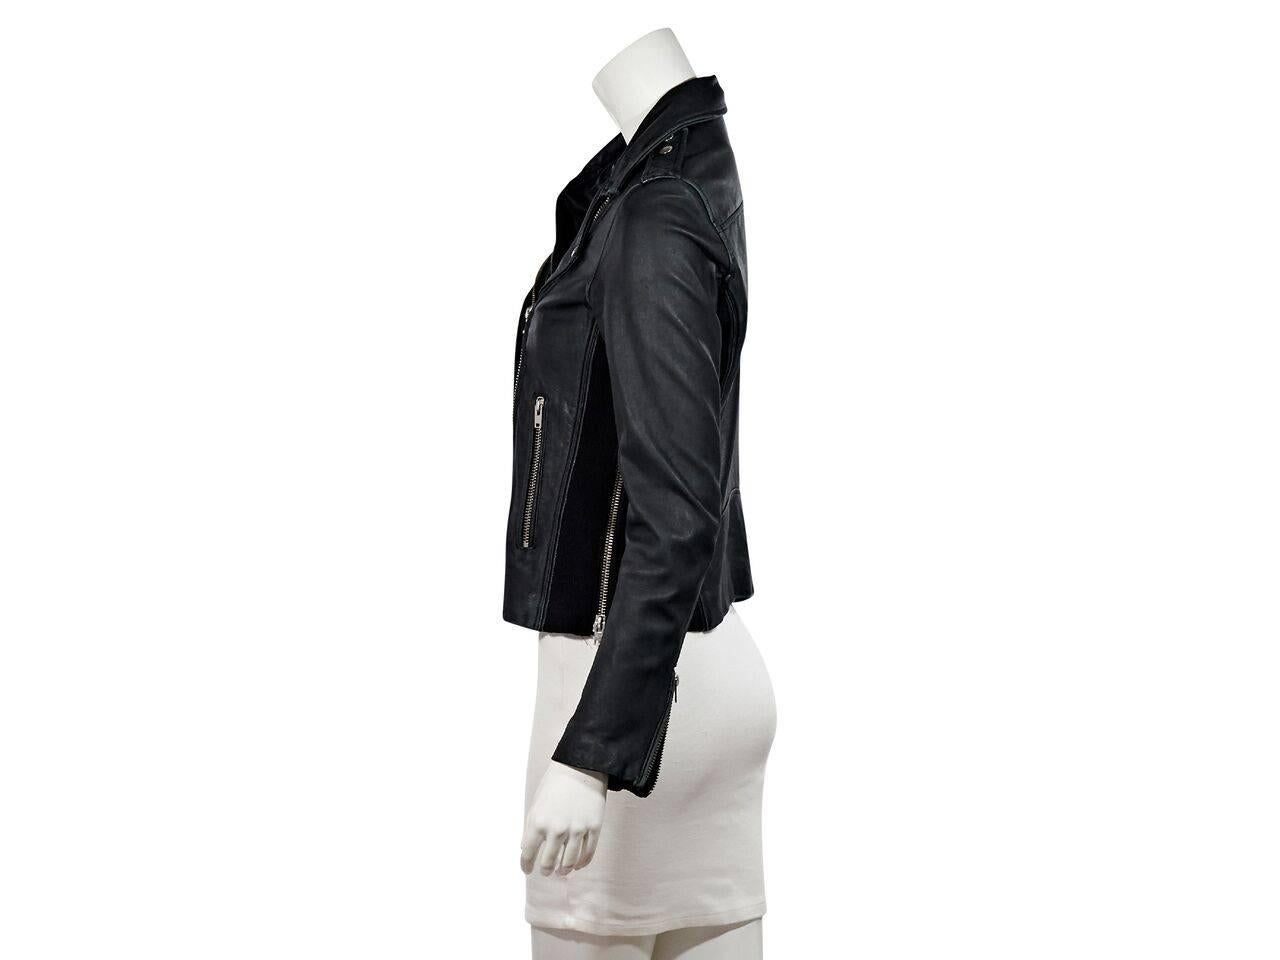 Product details:  Black distressed leather jacket by Iro.  Long sleeves.  Zip cuffs.  Notched lapel.  Asymmetrical zip-front closure.  Chest and waist zip pockets.  Side ribbed knit panels.  Silvertone hardware.  Label size FR 42.
Condition: